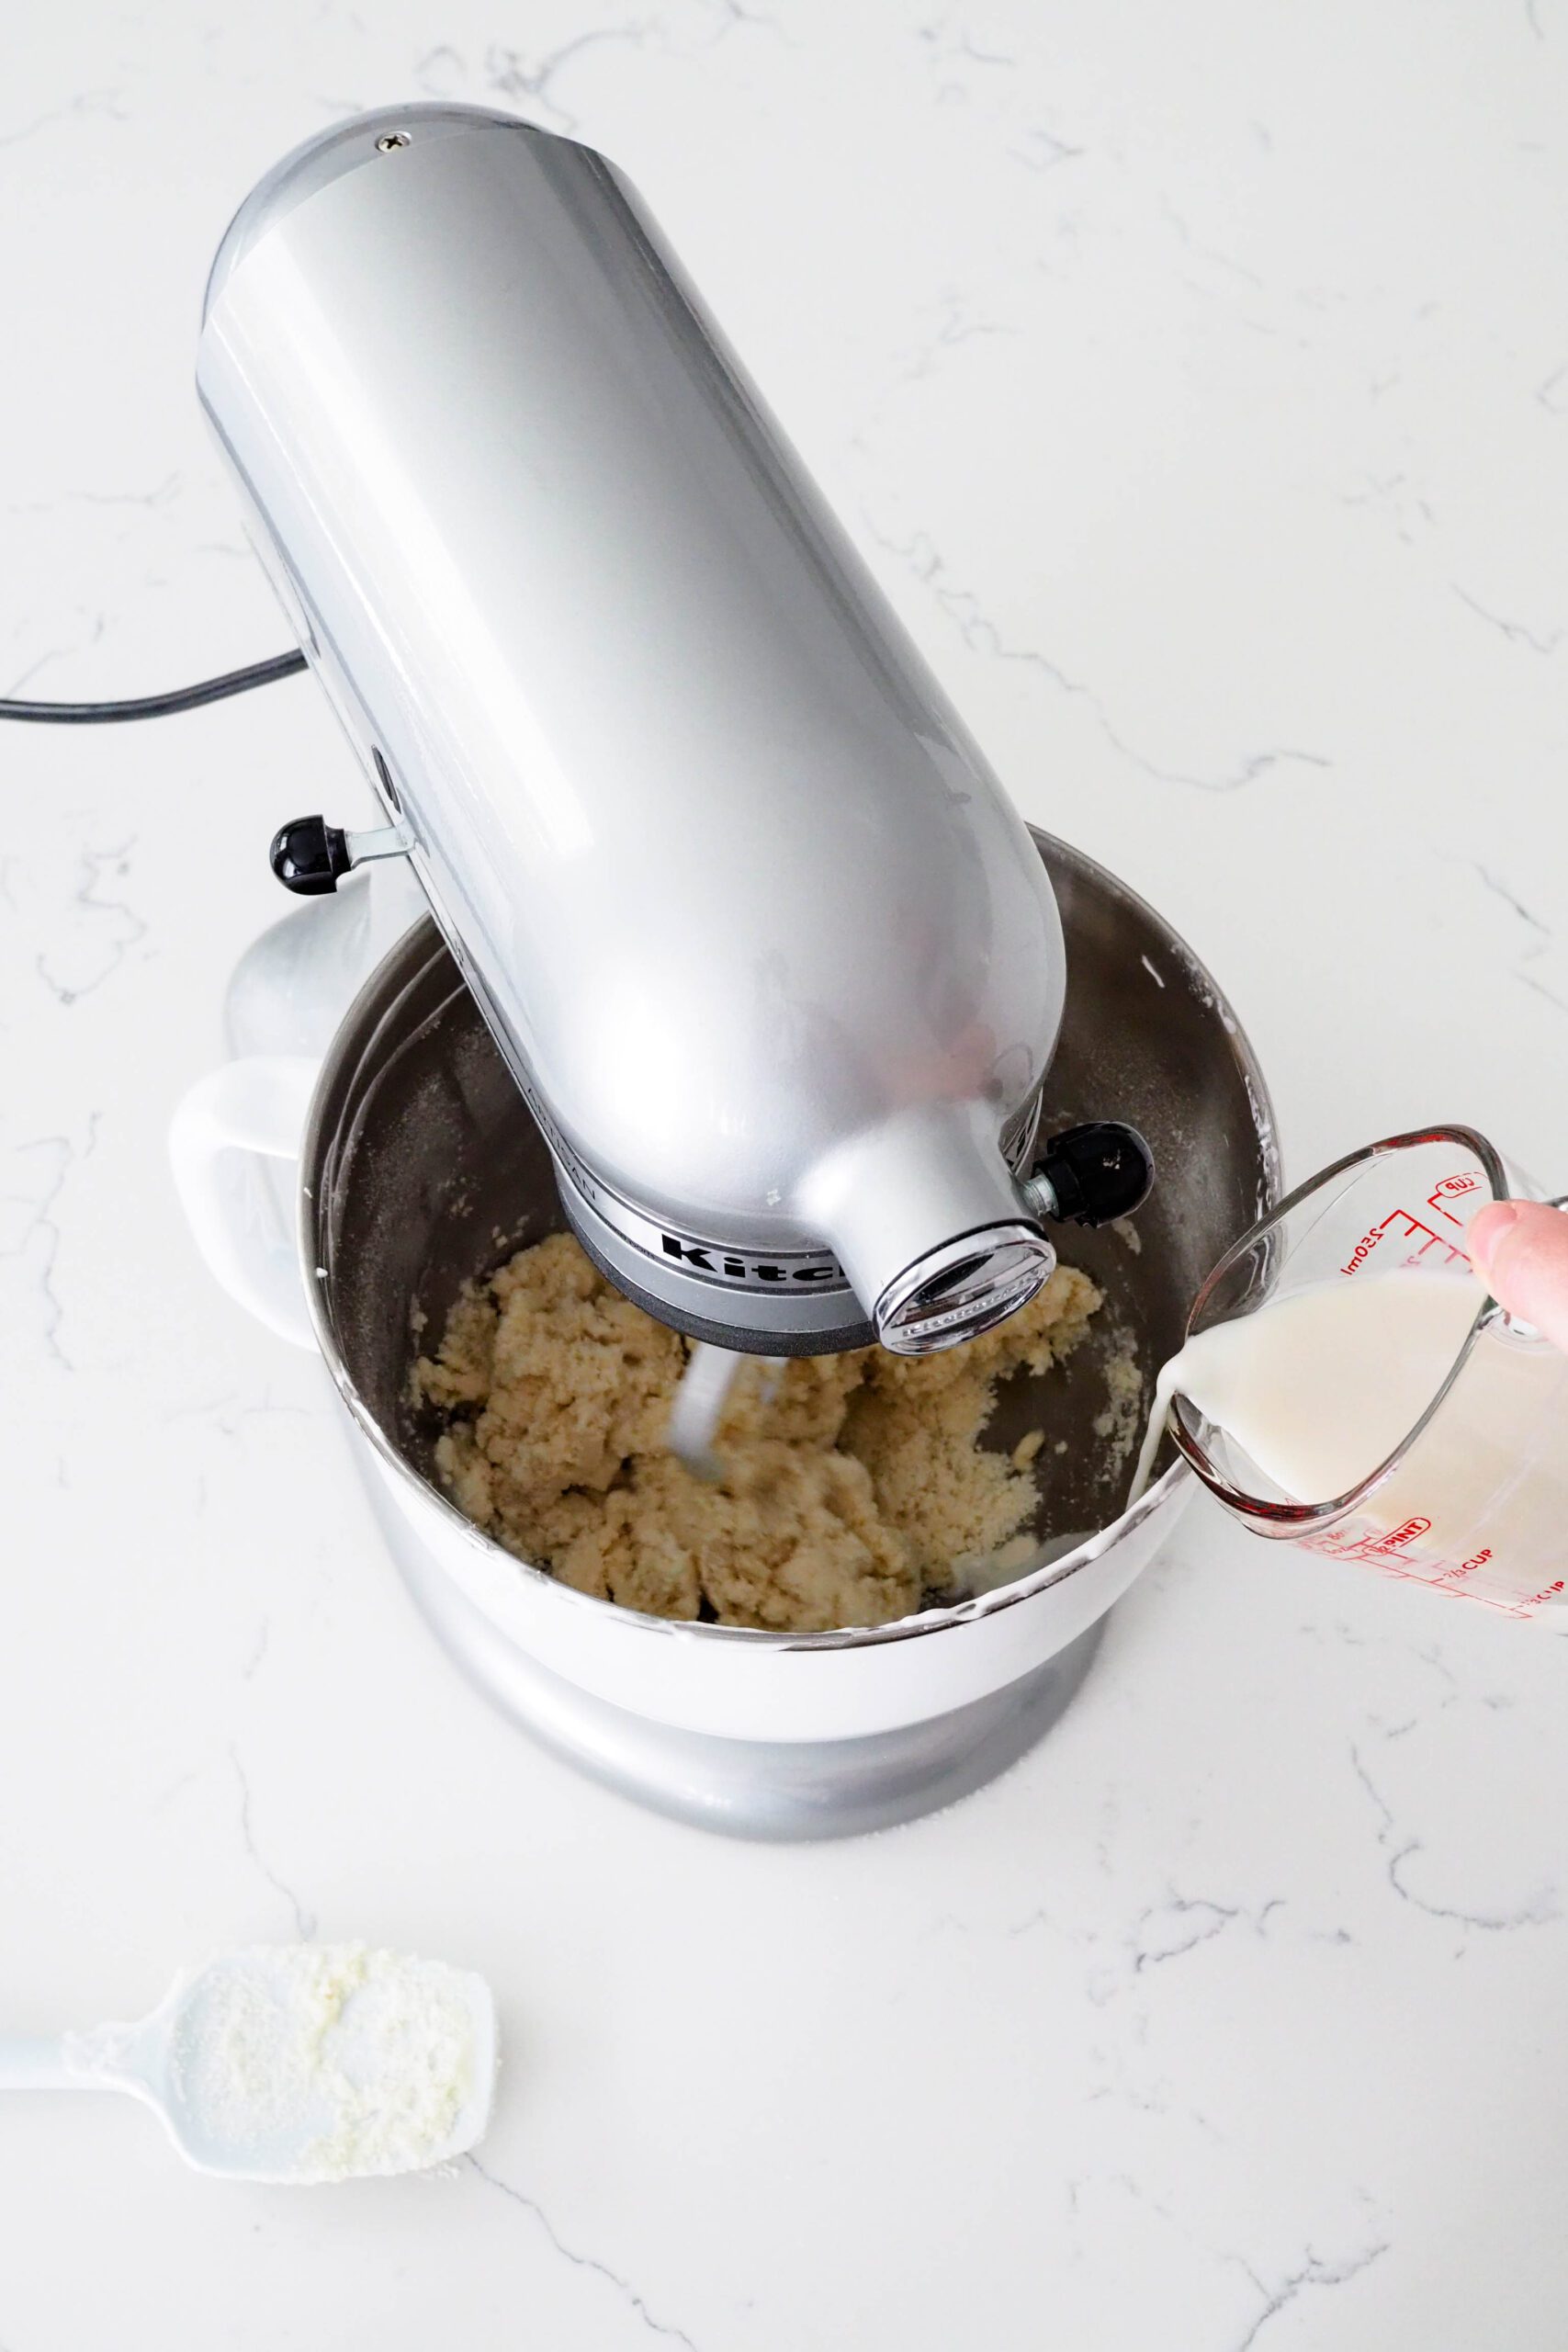 Milk is streamed into a mixing bowl with what appears to be breadcrumbs inside.